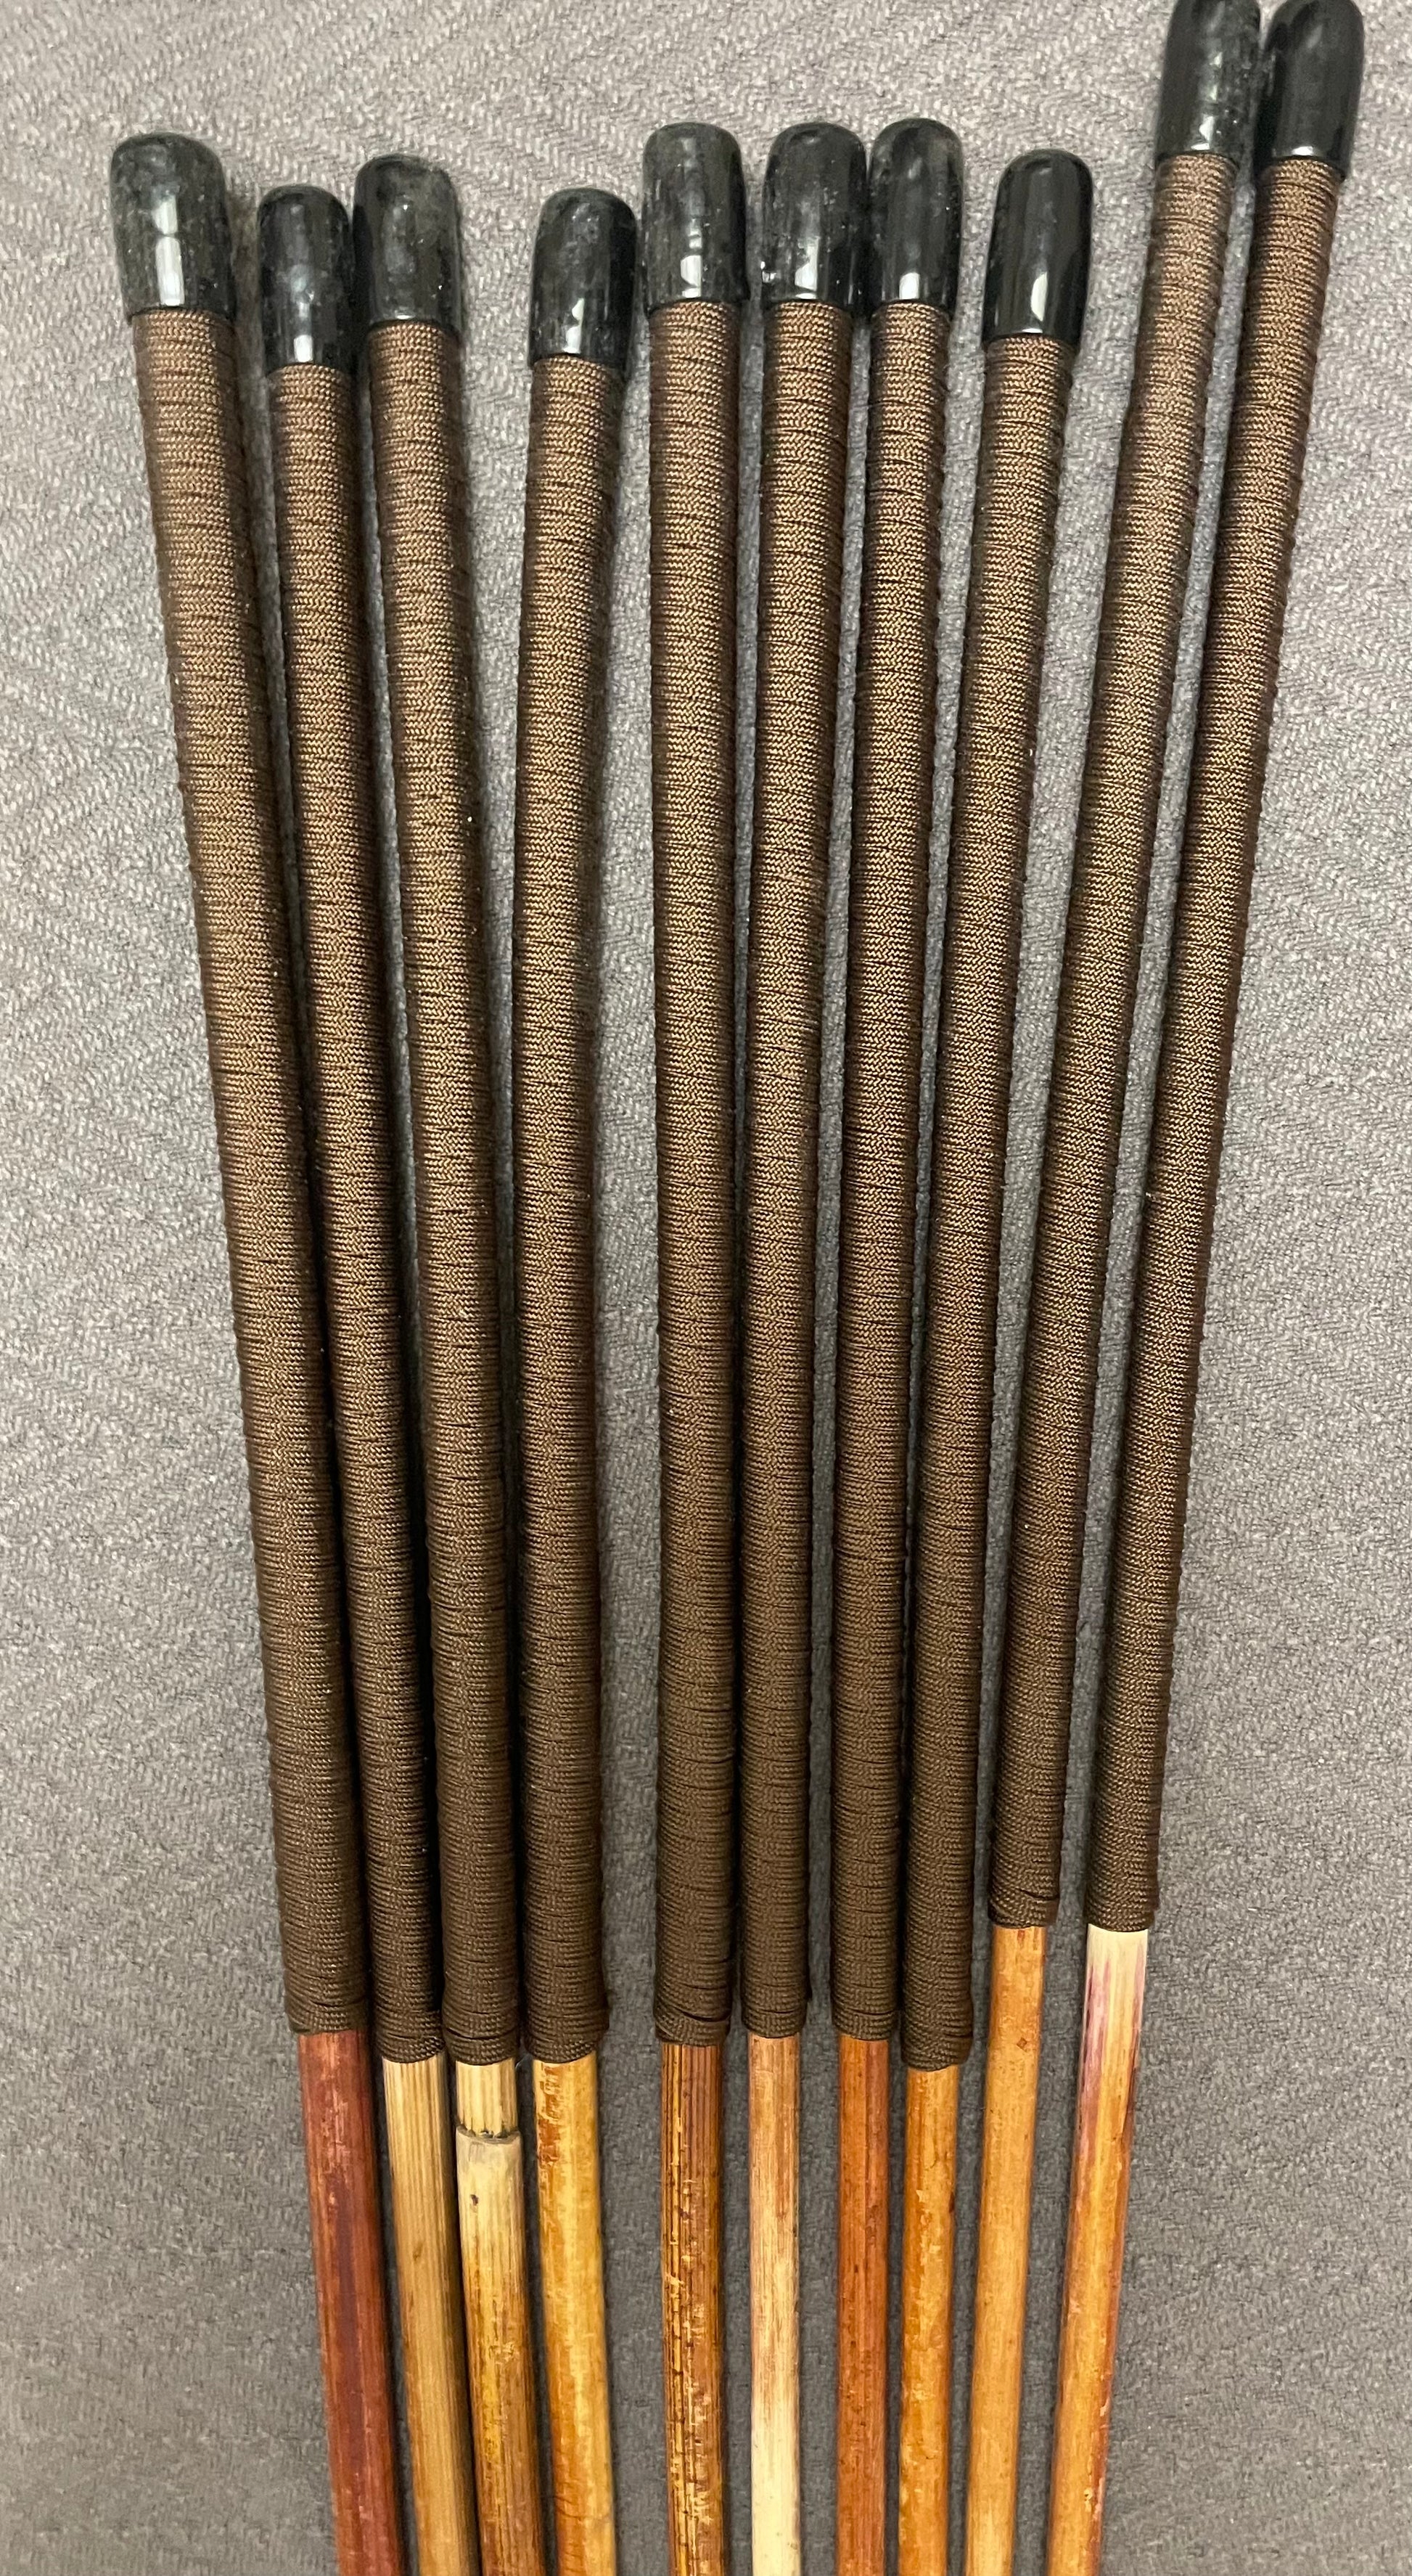 Set of 10 Classic Dragon Rattan Punishment Canes with Brown Paracord Handles - 95 cms Length - Sales Special